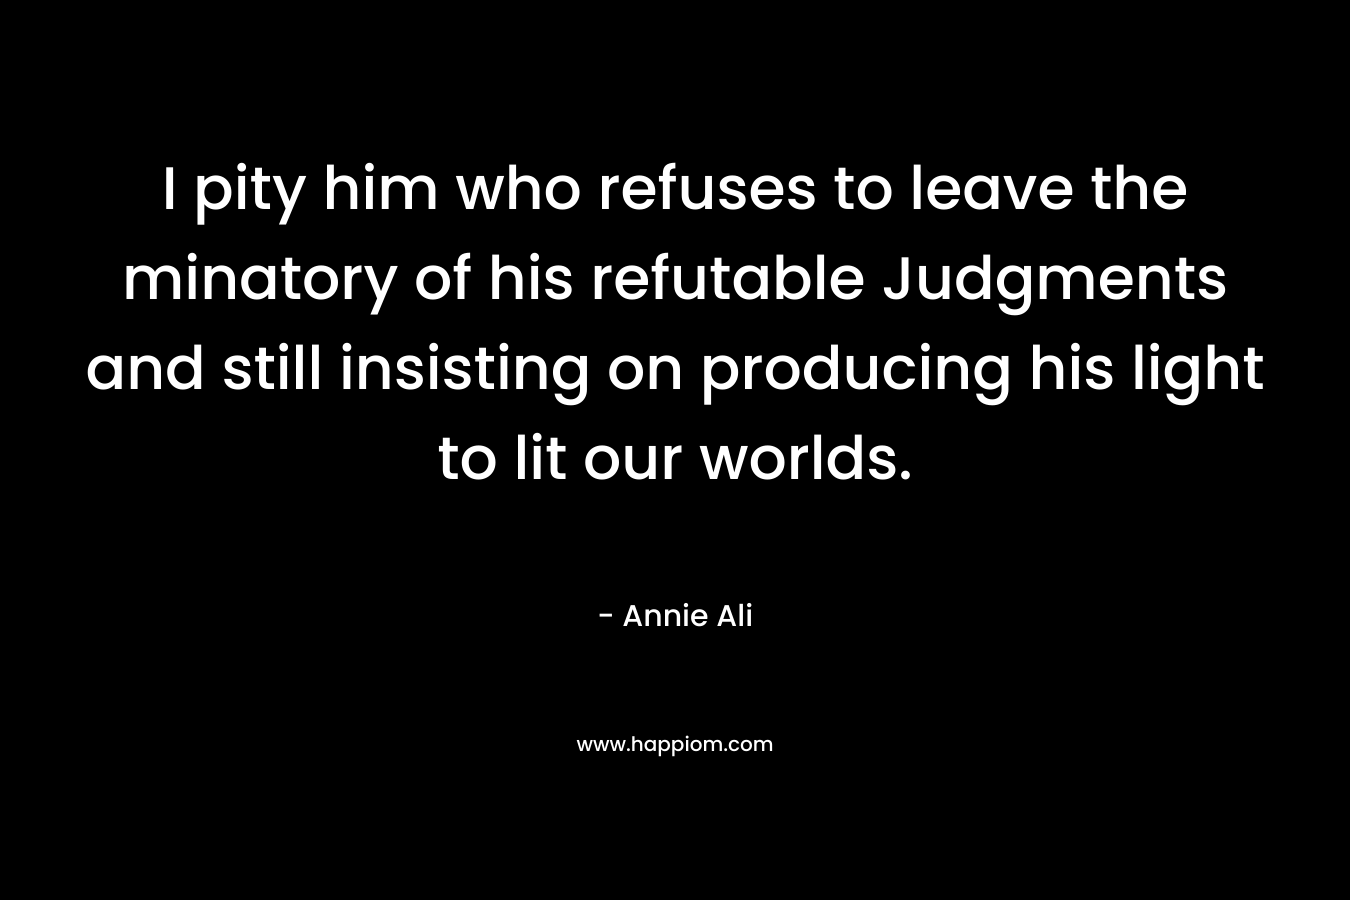 I pity him who refuses to leave the minatory of his refutable Judgments and still insisting on producing his light to lit our worlds.